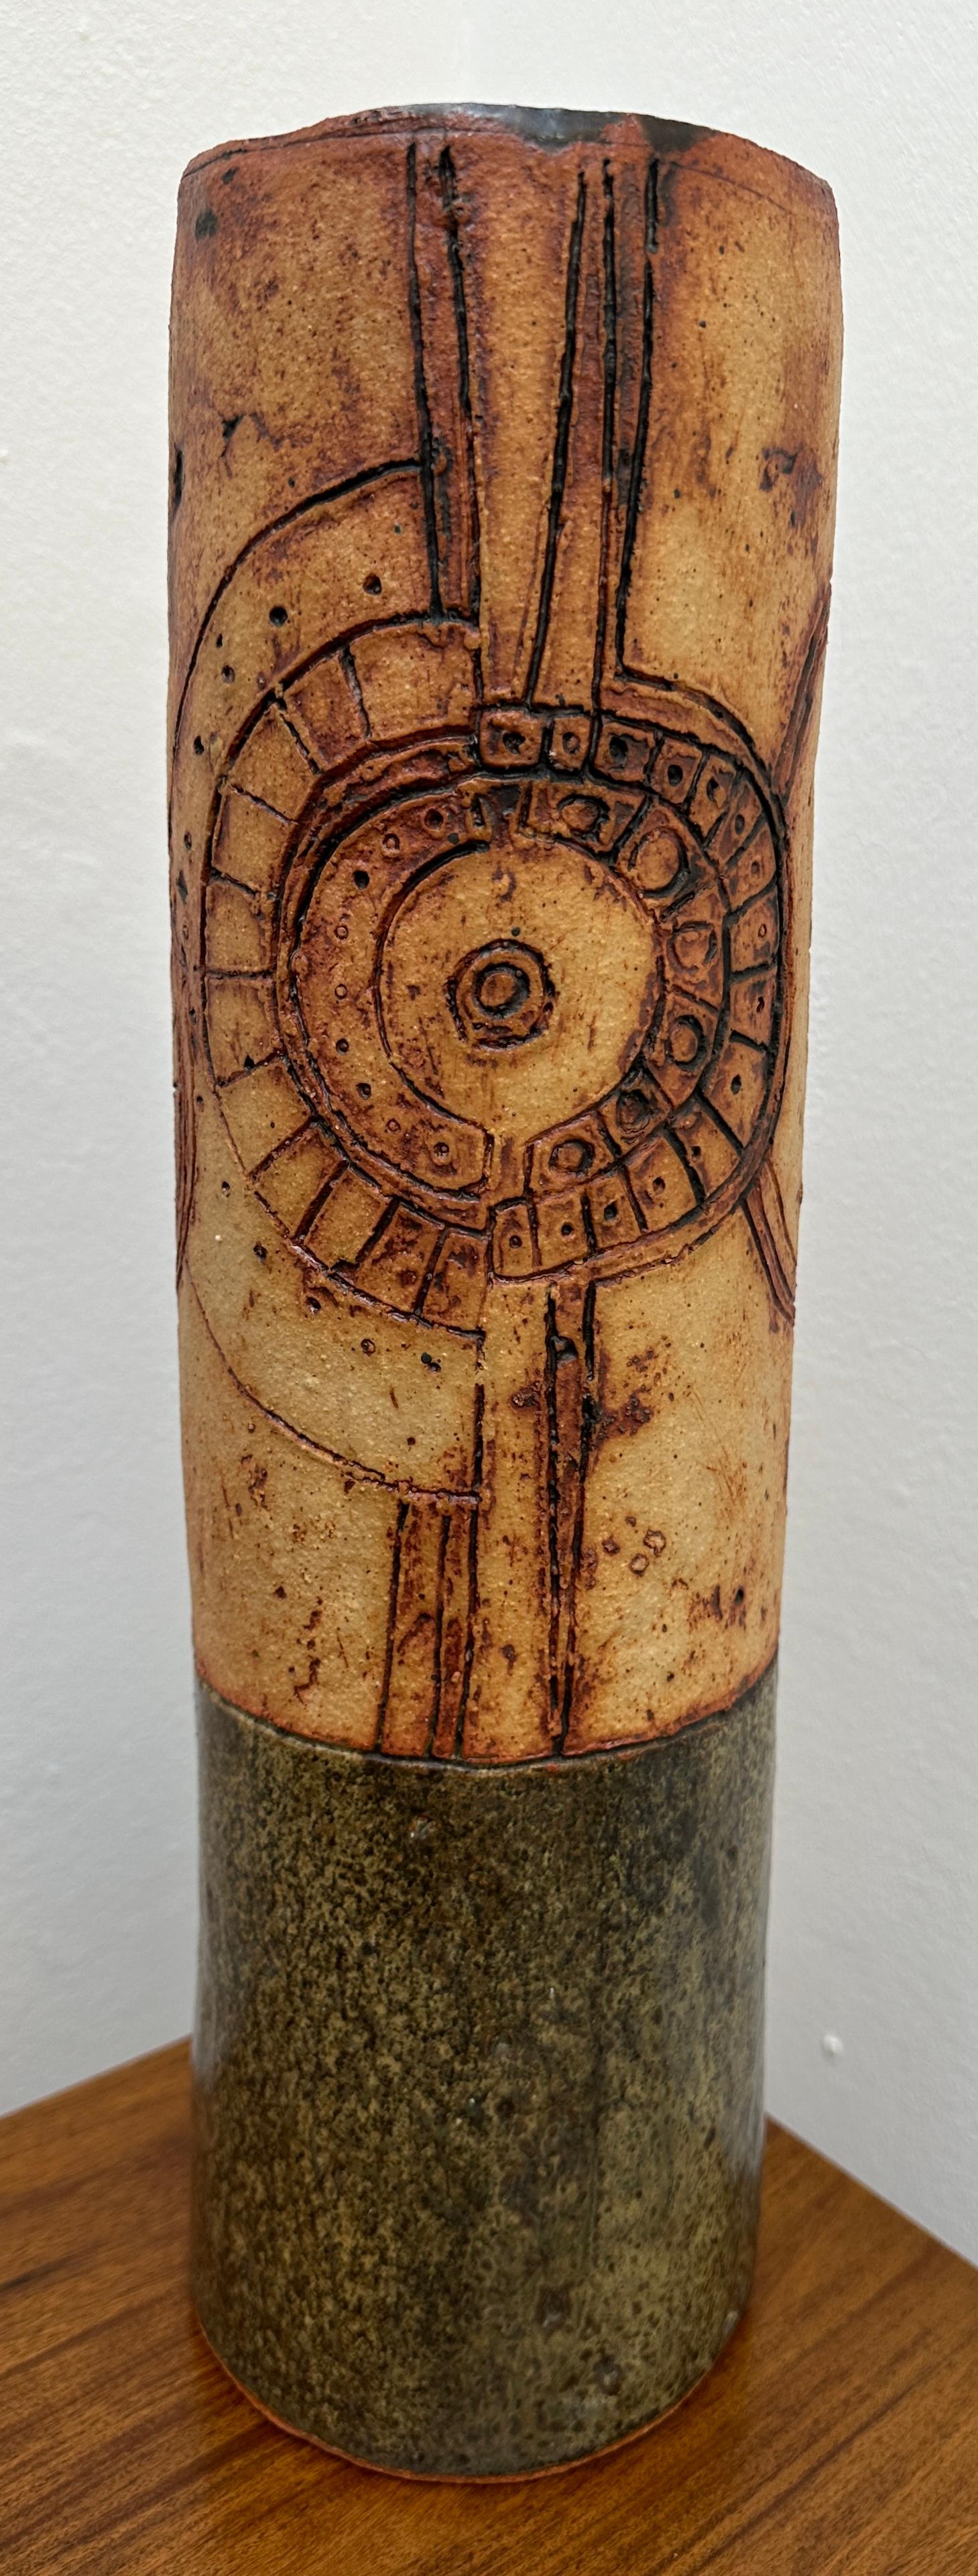 A large 1960s vintage Studio Pottery early brutalist cylindrical ceramic vase by British ceramicist Bernard Rooke.  The upper two-thirds features an incised abstract design which is reminiscent of a clock face and its inner workings in hues of